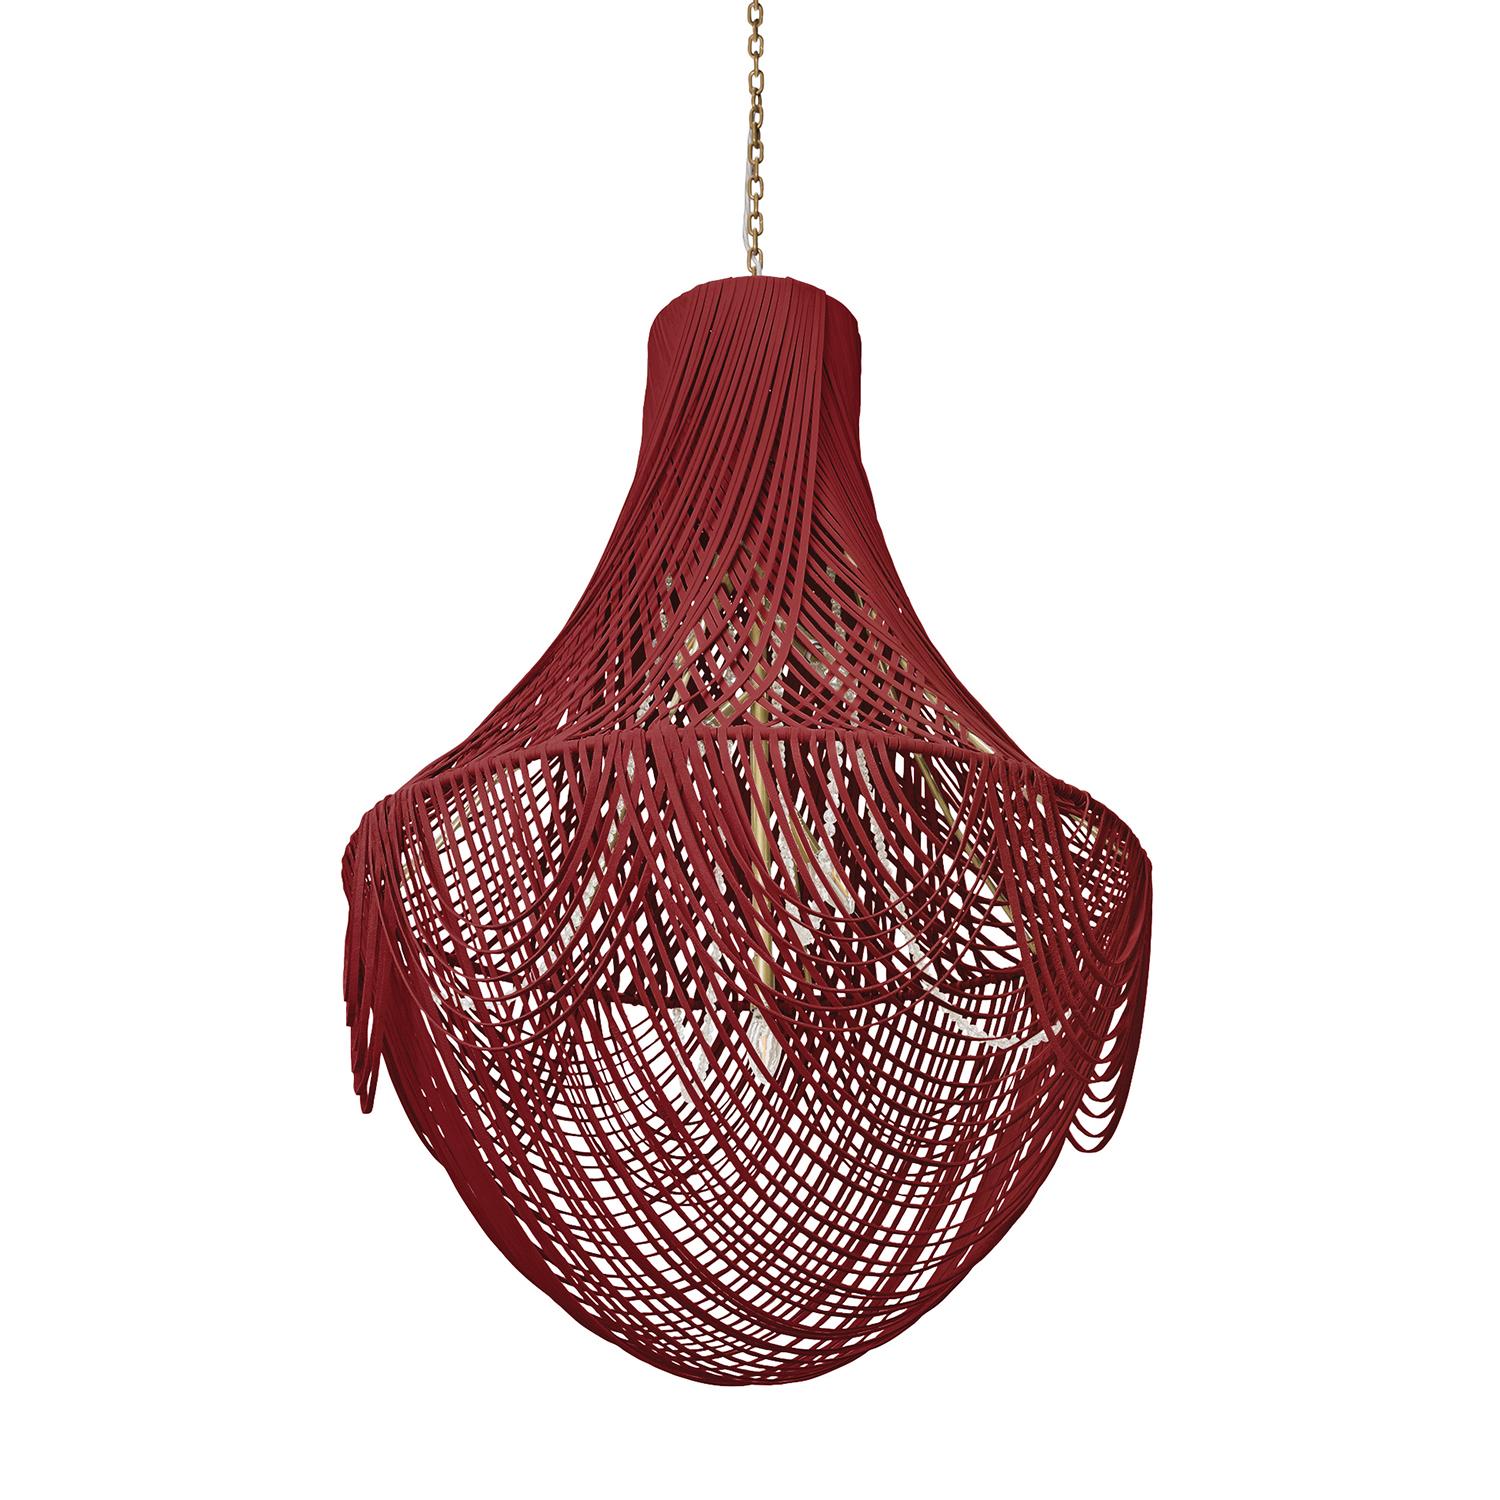 Empire Chandelier - Large - NeKeia Leather